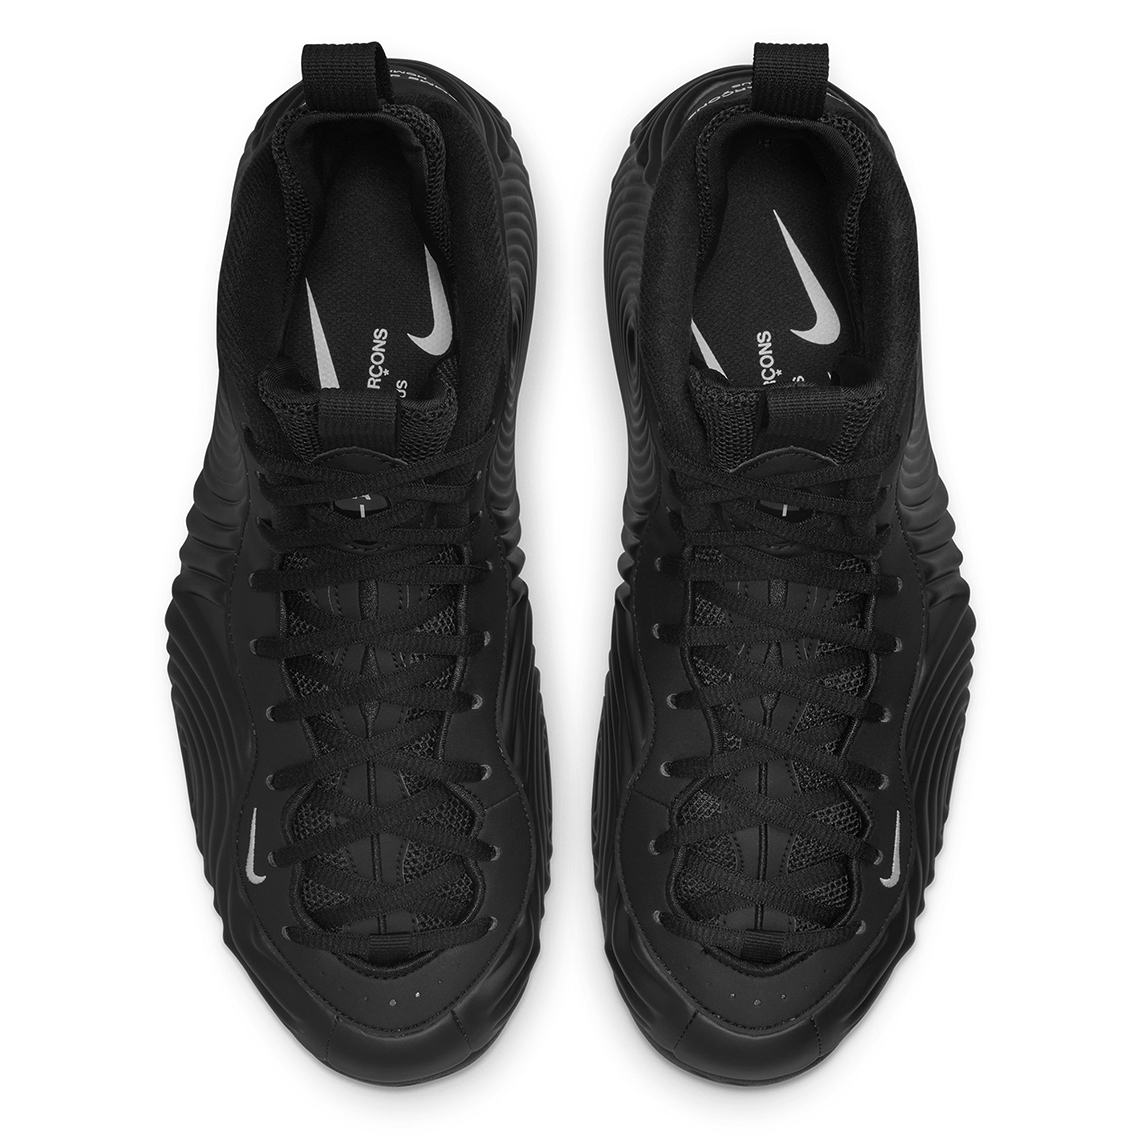 COMME des GARCONS Nike Foamposite One Black White Release Date